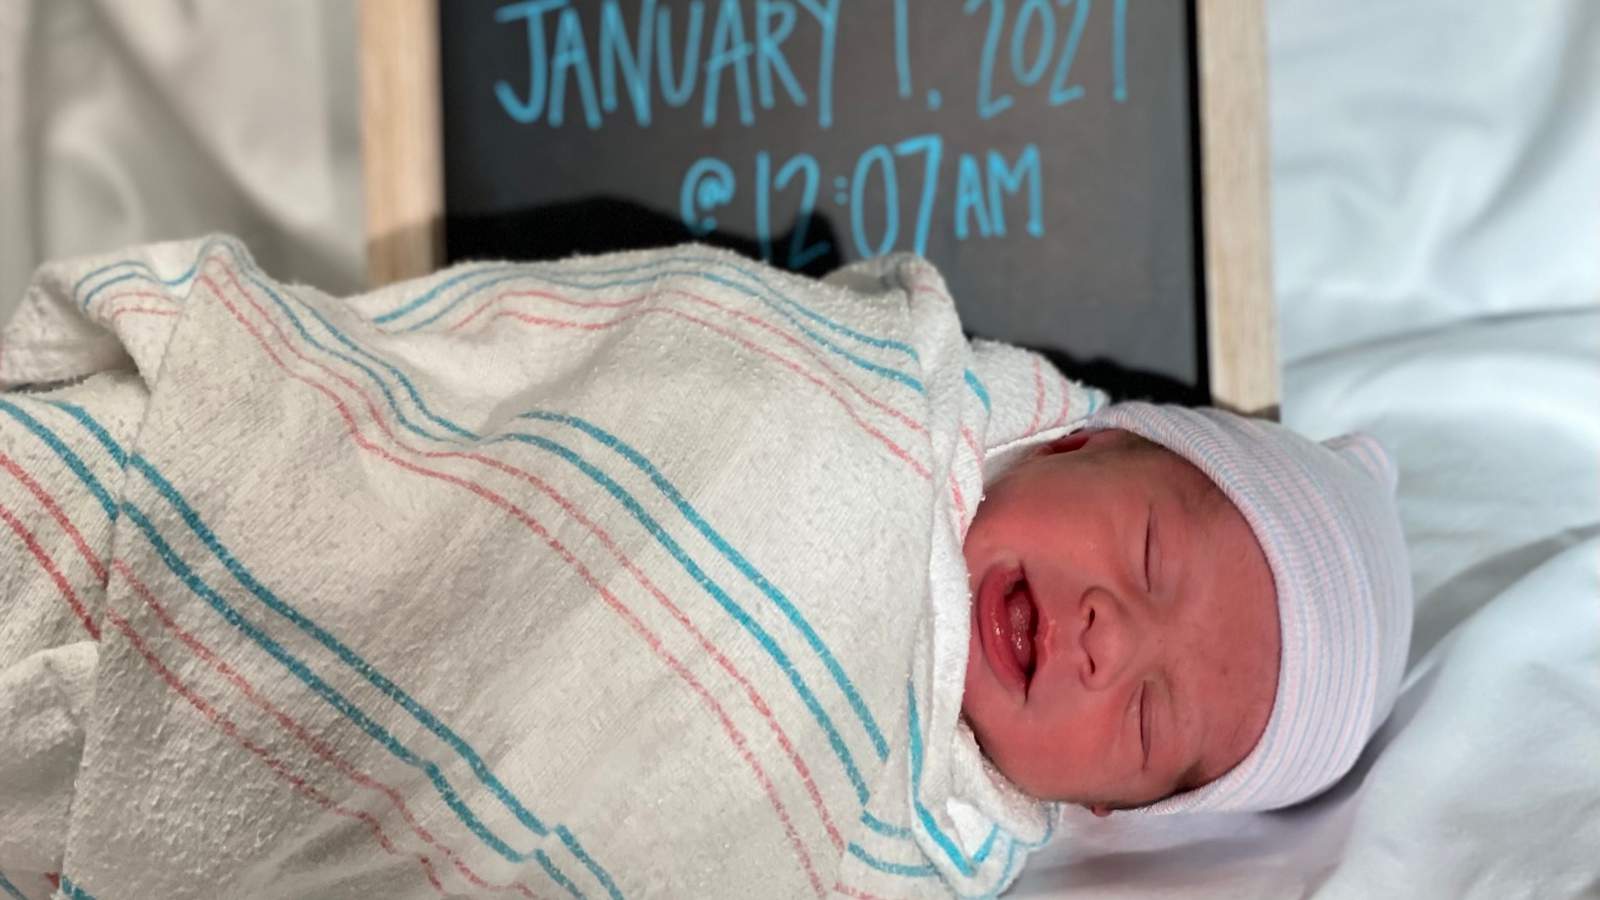 Minutes after midnight, Houston welcomes one of 2021’s first babies